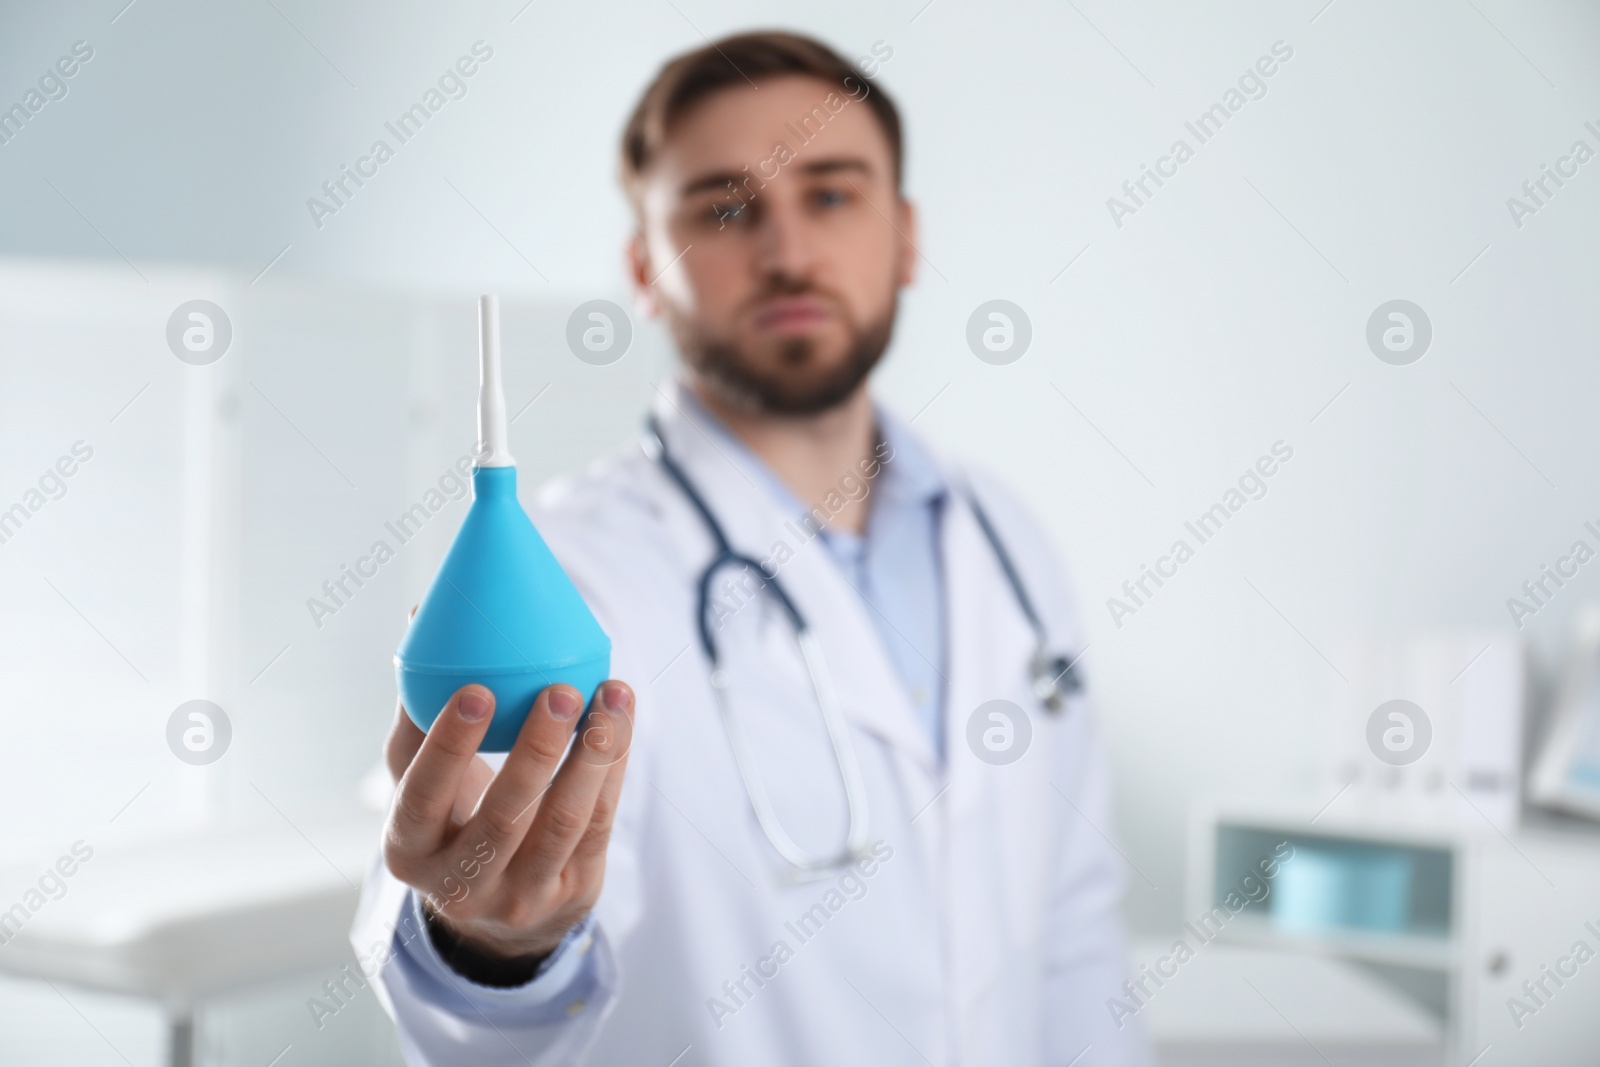 Photo of Doctor holding rubber enema in examination room, focus on hand. Space for text